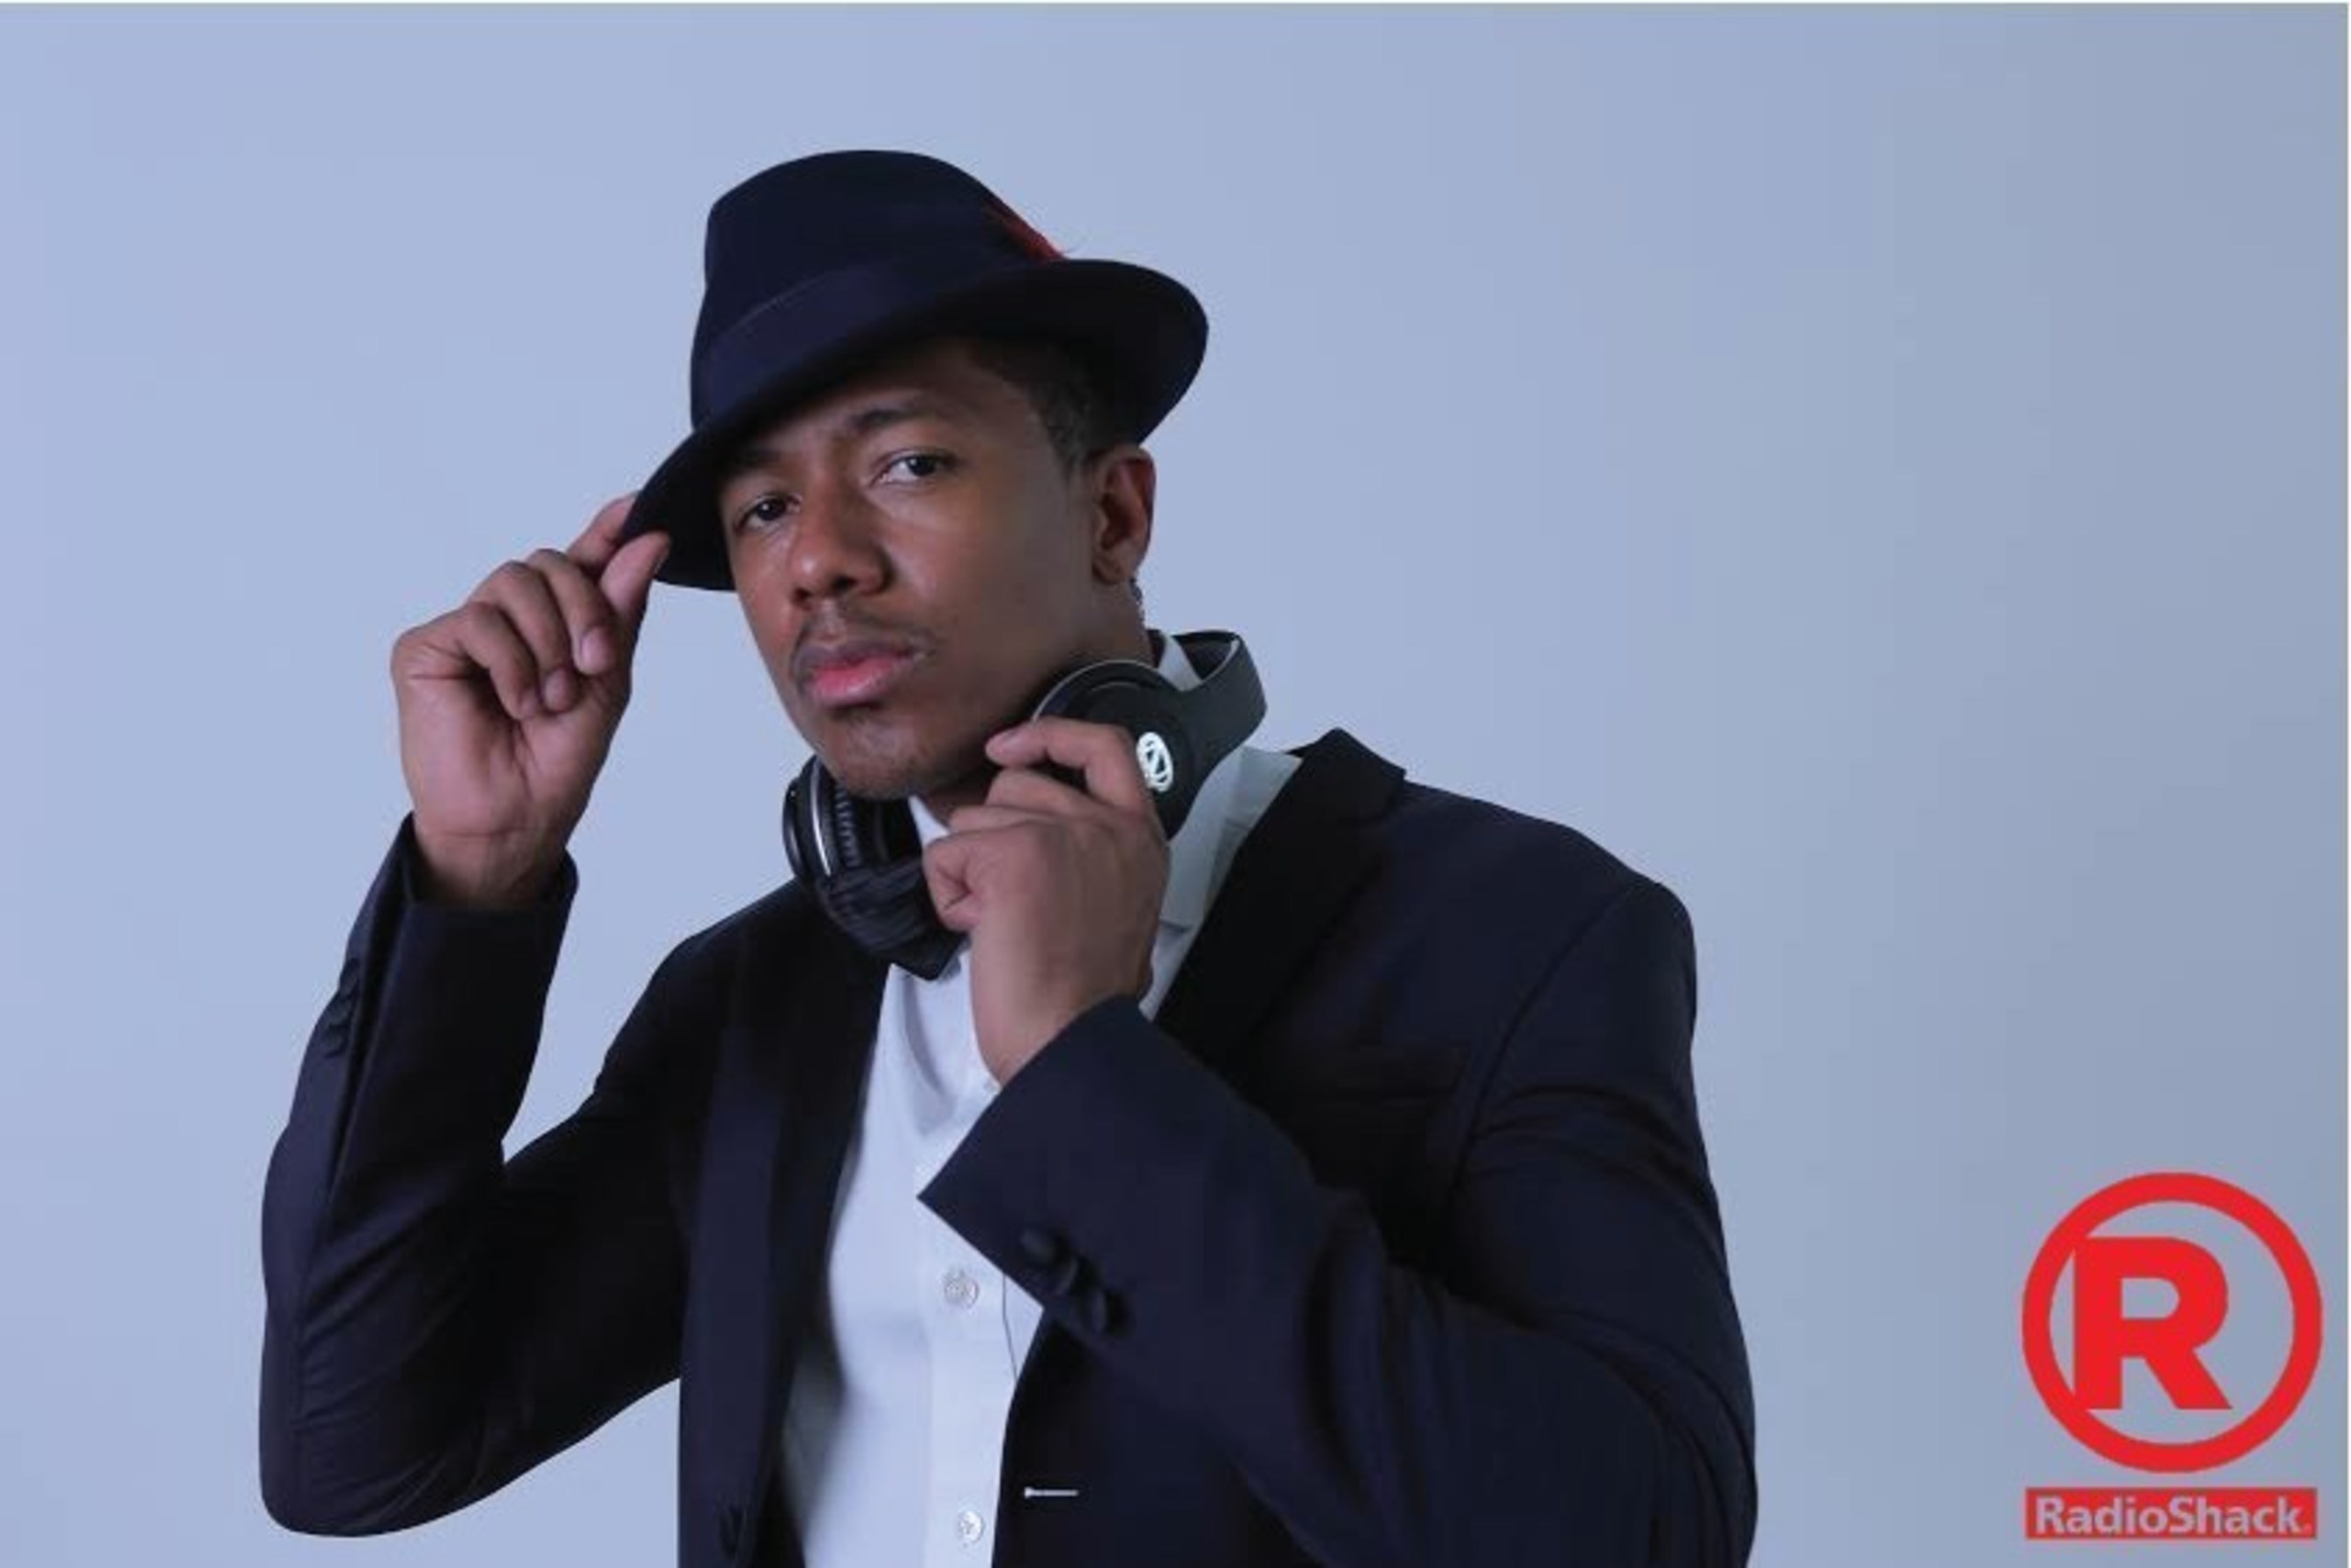 Nick Cannon joins RadioShack as Chief Creative Officer